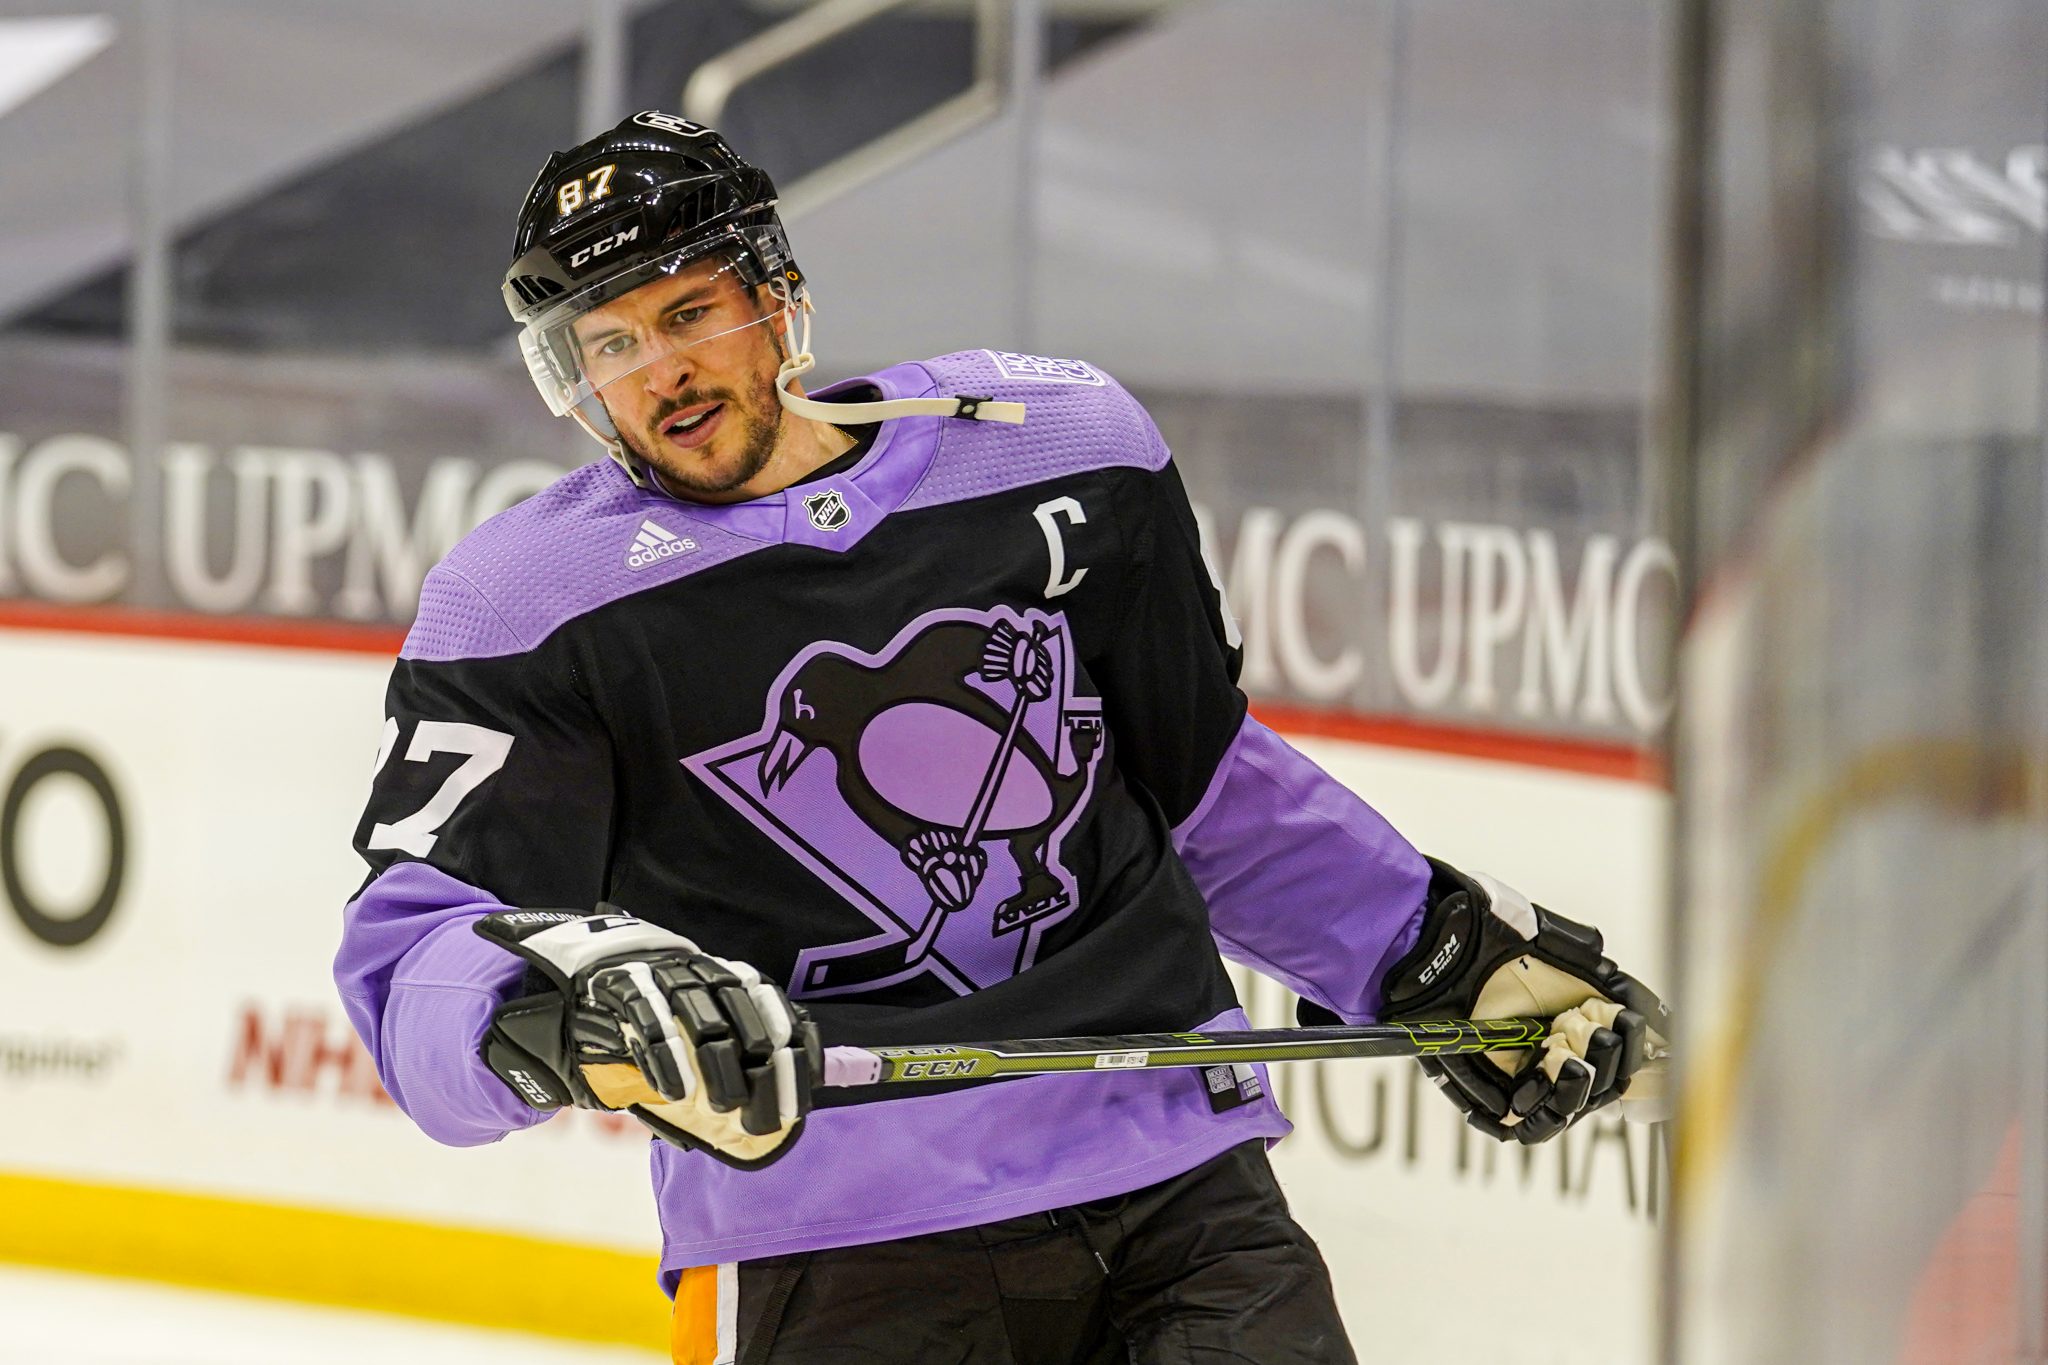 Pittsburgh Penguins - Tomorrow we support the NHL's Hockey Fights Cancer  initiative. Penguins players will wear special purple jerseys in warm-ups,  which will be later auctioned to benefit the Mario Lemieux Foundation